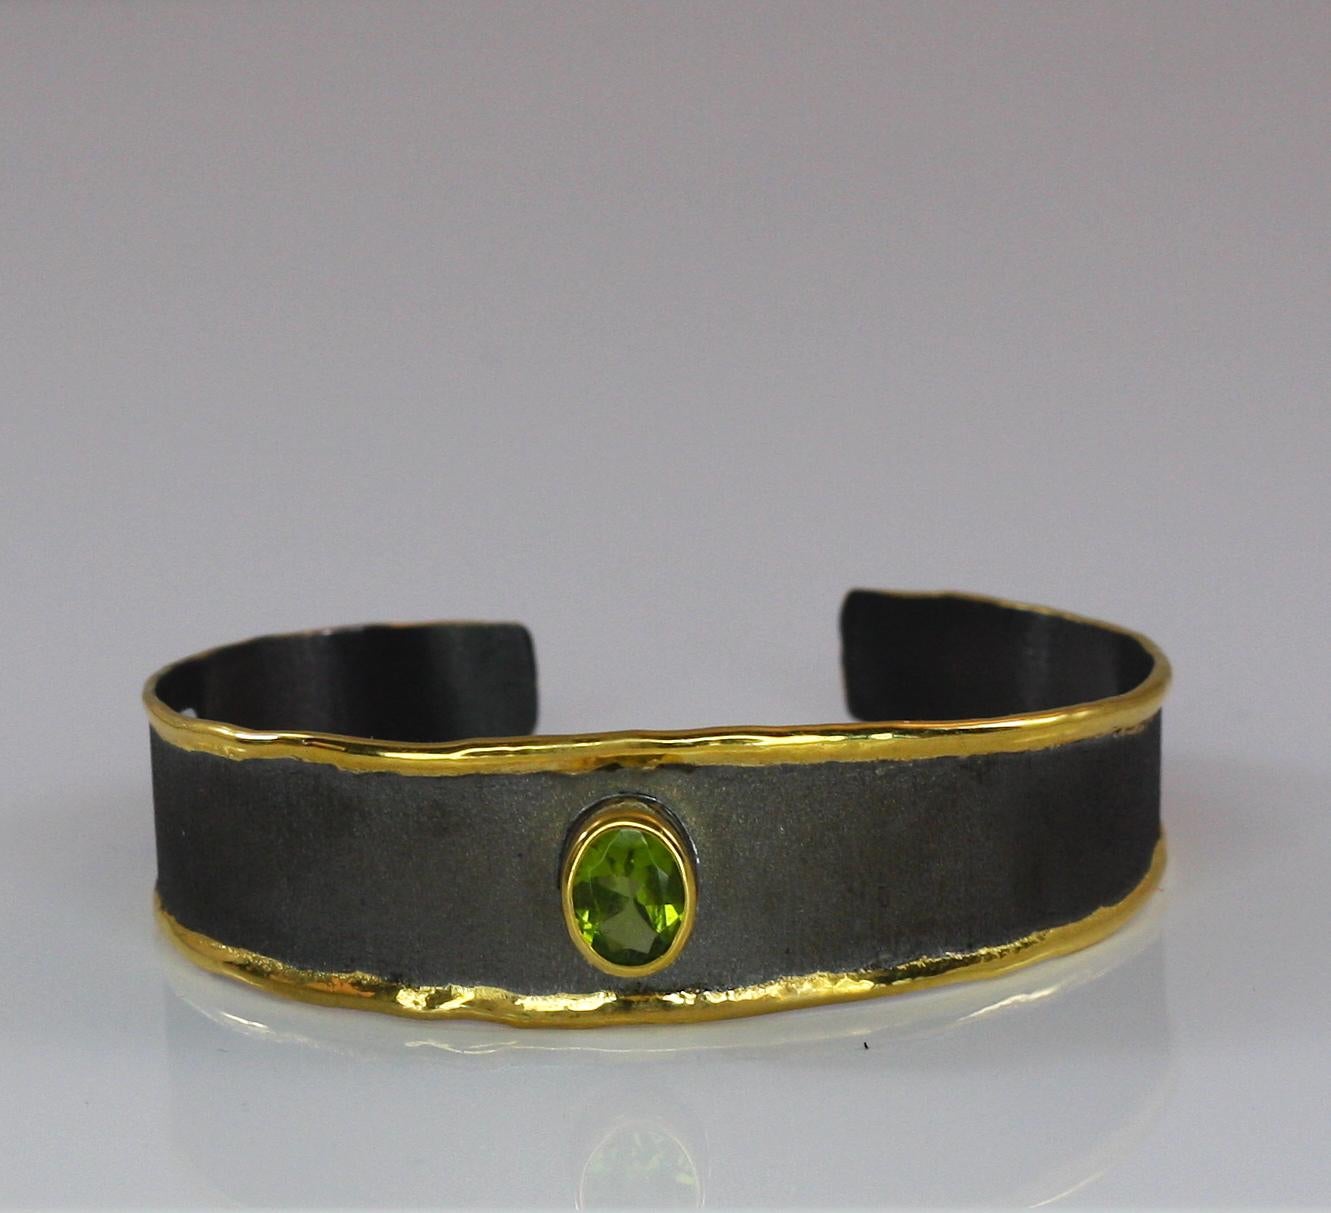 Yianni Creations bracelet crafted in Greece for the Eclyps Collection from fine silver 950 purity and overlayed with Black Rhodium. This gorgeous handmade artisan bangle bracelet features a 1.35 Carat Peridot. The stunning liquid edges are decorated